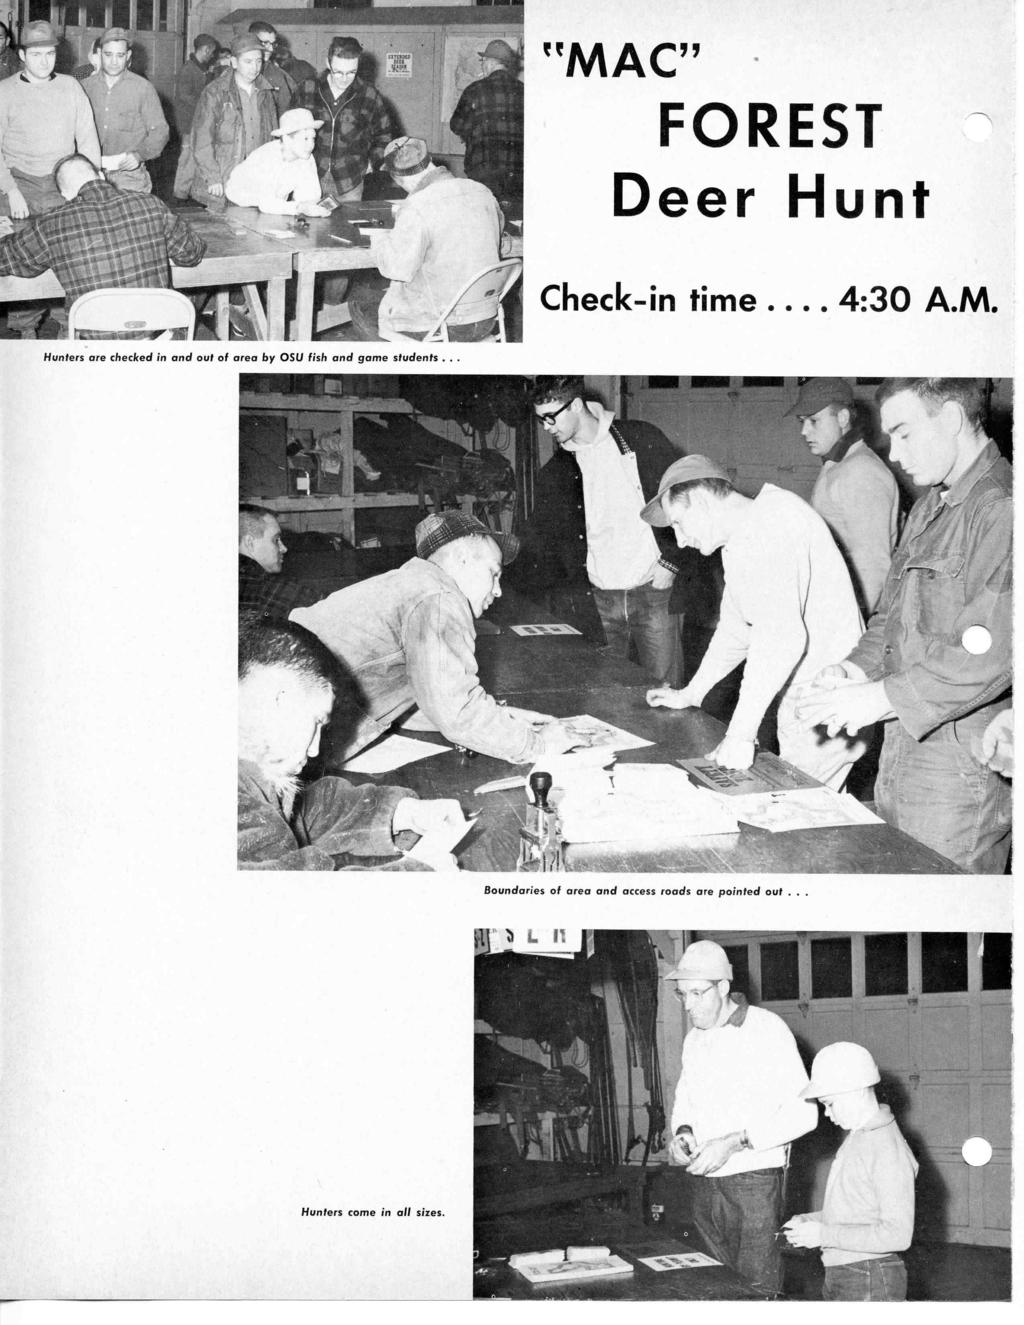 "MAC" FOREST Deer Hunt Check-in time... 4:30 A.M. Hunters are checked in and out of area by OSU fish and game students.